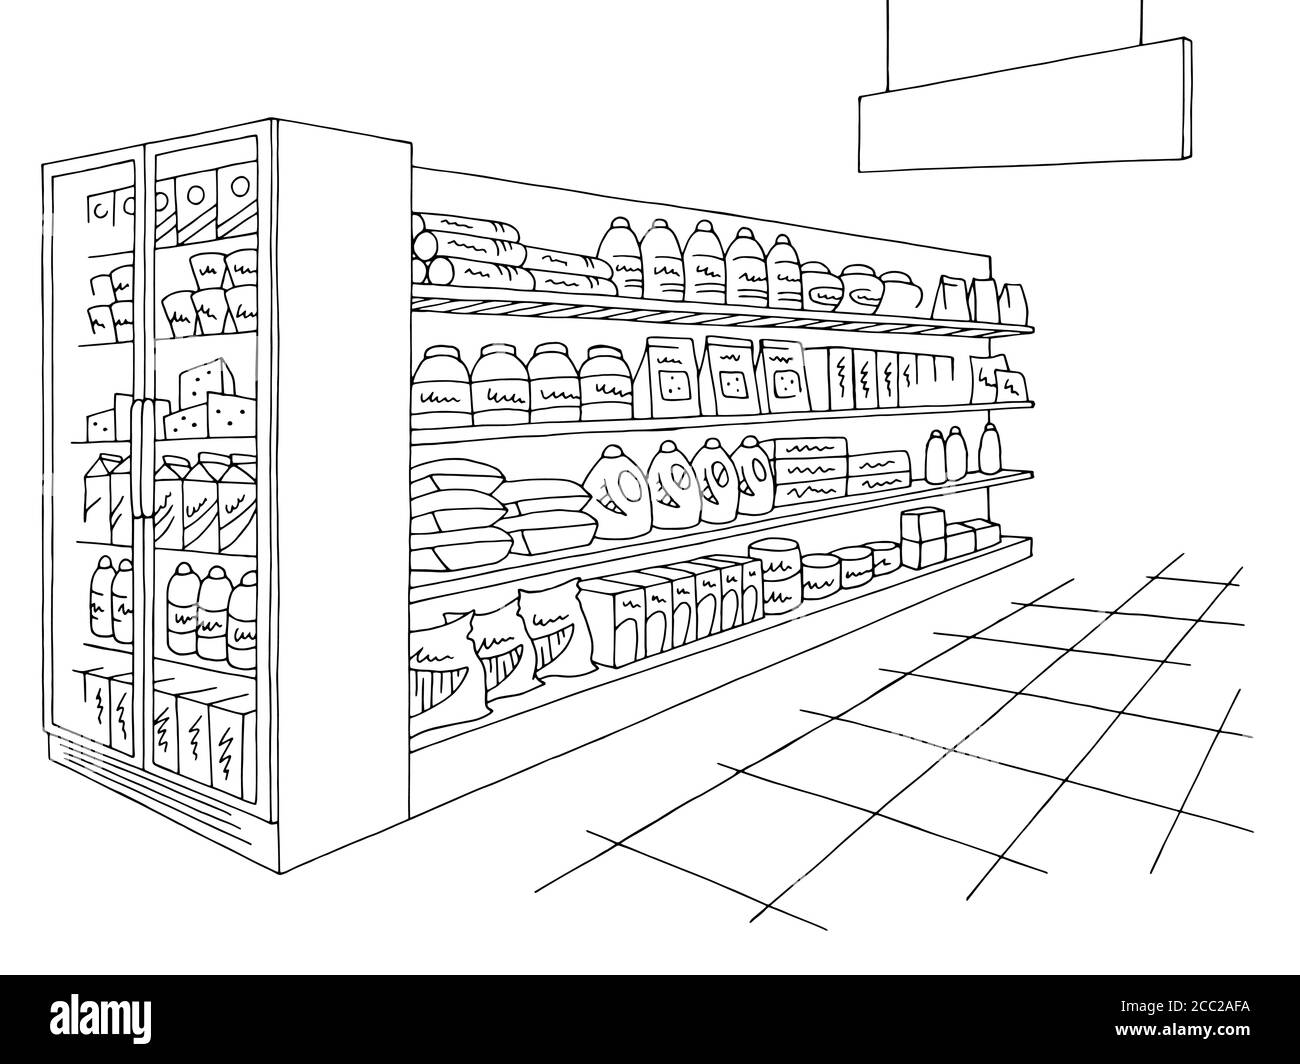 How to Draw Supermarket  YouTube